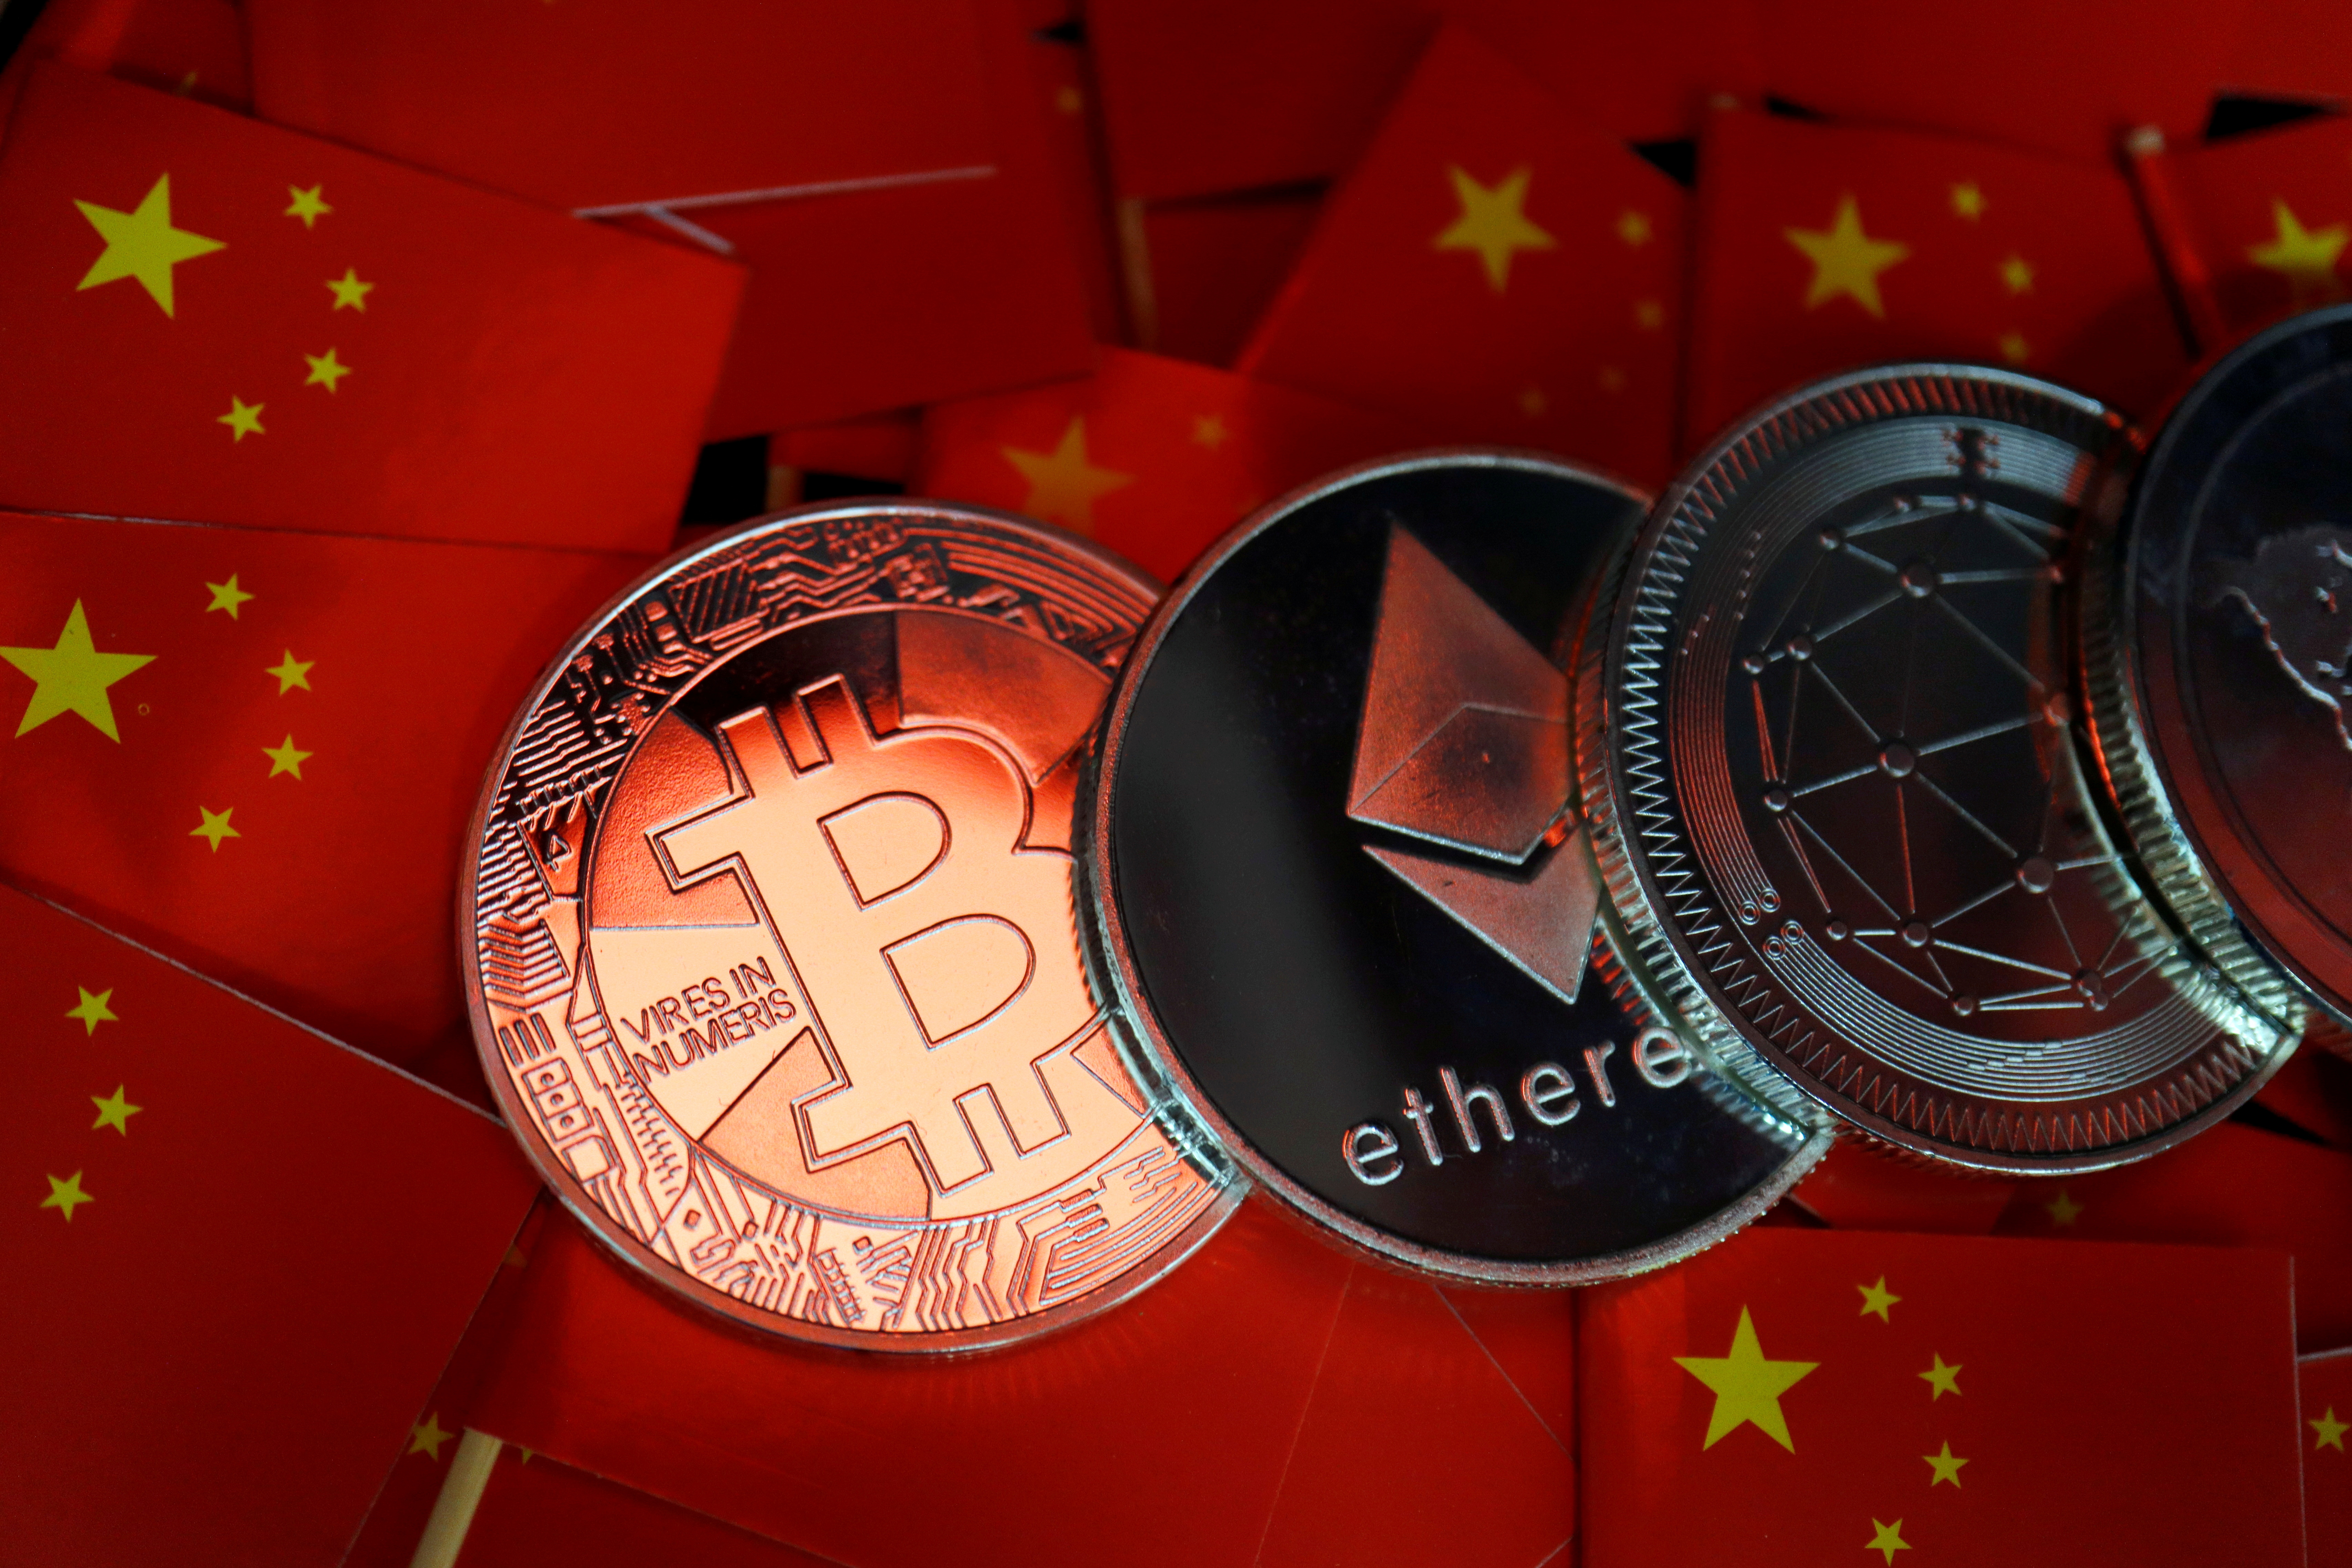 Representations of Bitcoin and other cryptocurrencies are seen amid China's flags in this illustration picture taken September 27, 2021. REUTERS/Florence Lo/Illustration